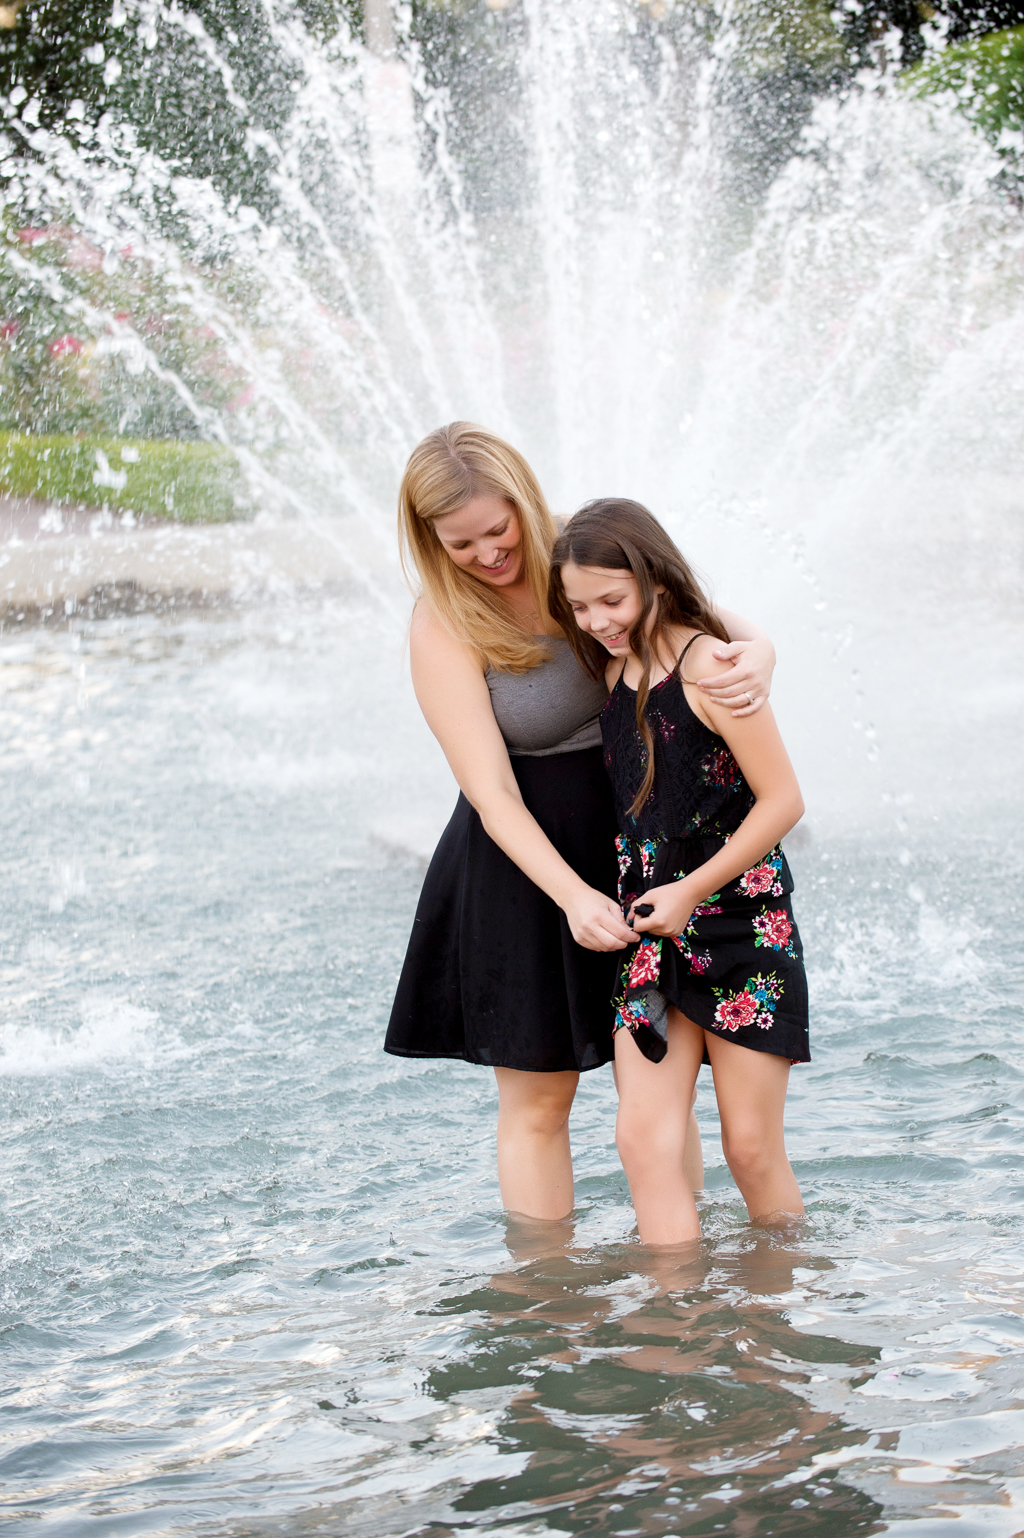 mom and daughter walk through water fountain